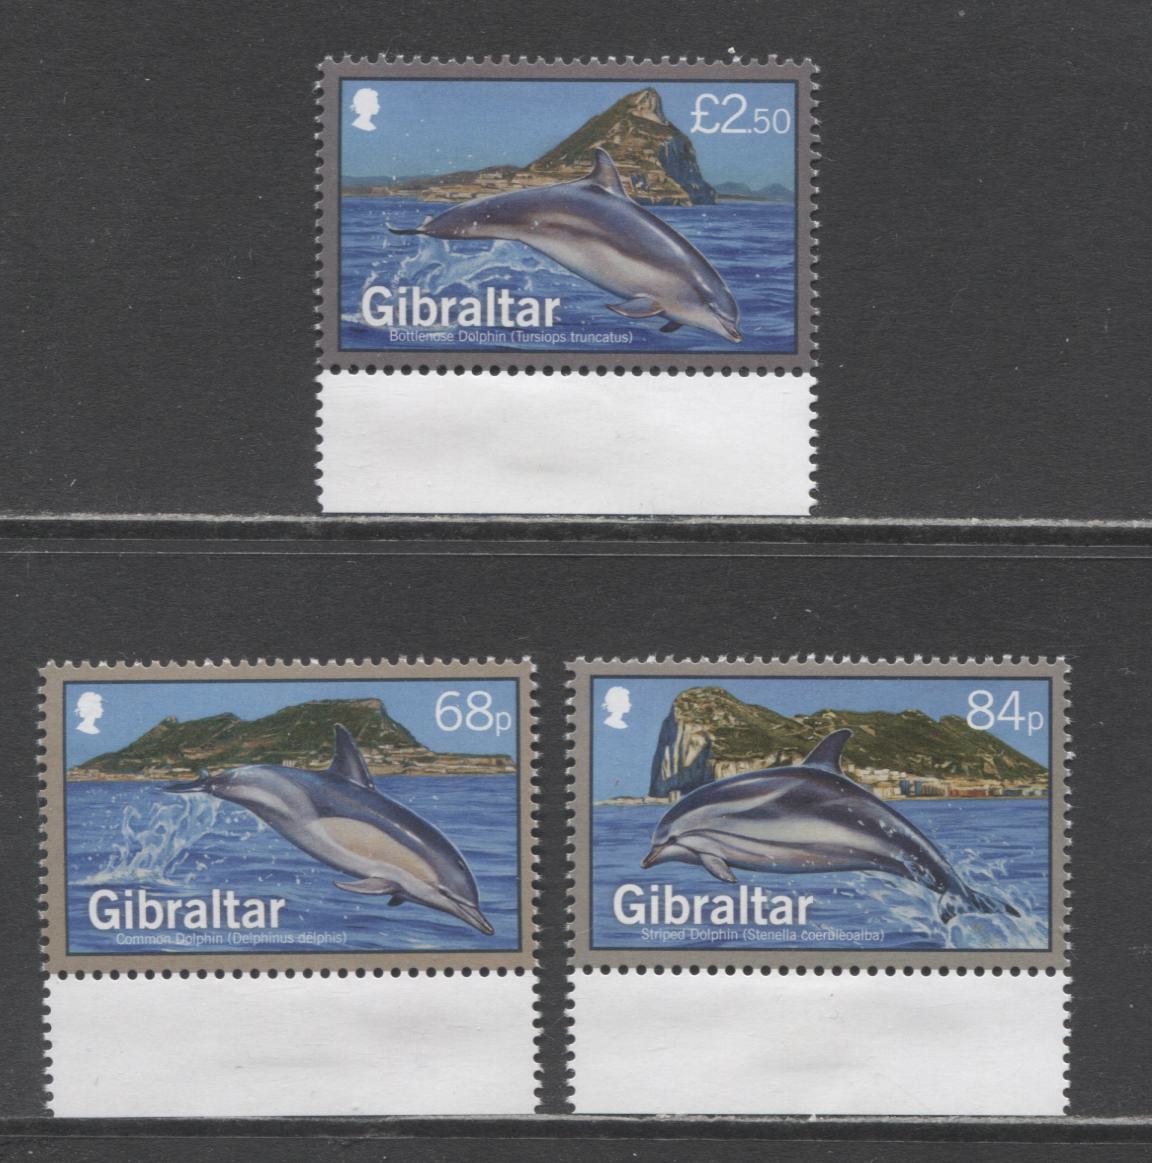 Lot 6 Gibraltar SC#1455-1457 2014 Sealife Issue, 3 VFNH Singles, Click on Listing to See ALL Pictures, 2017 Scott Cat. $13.5